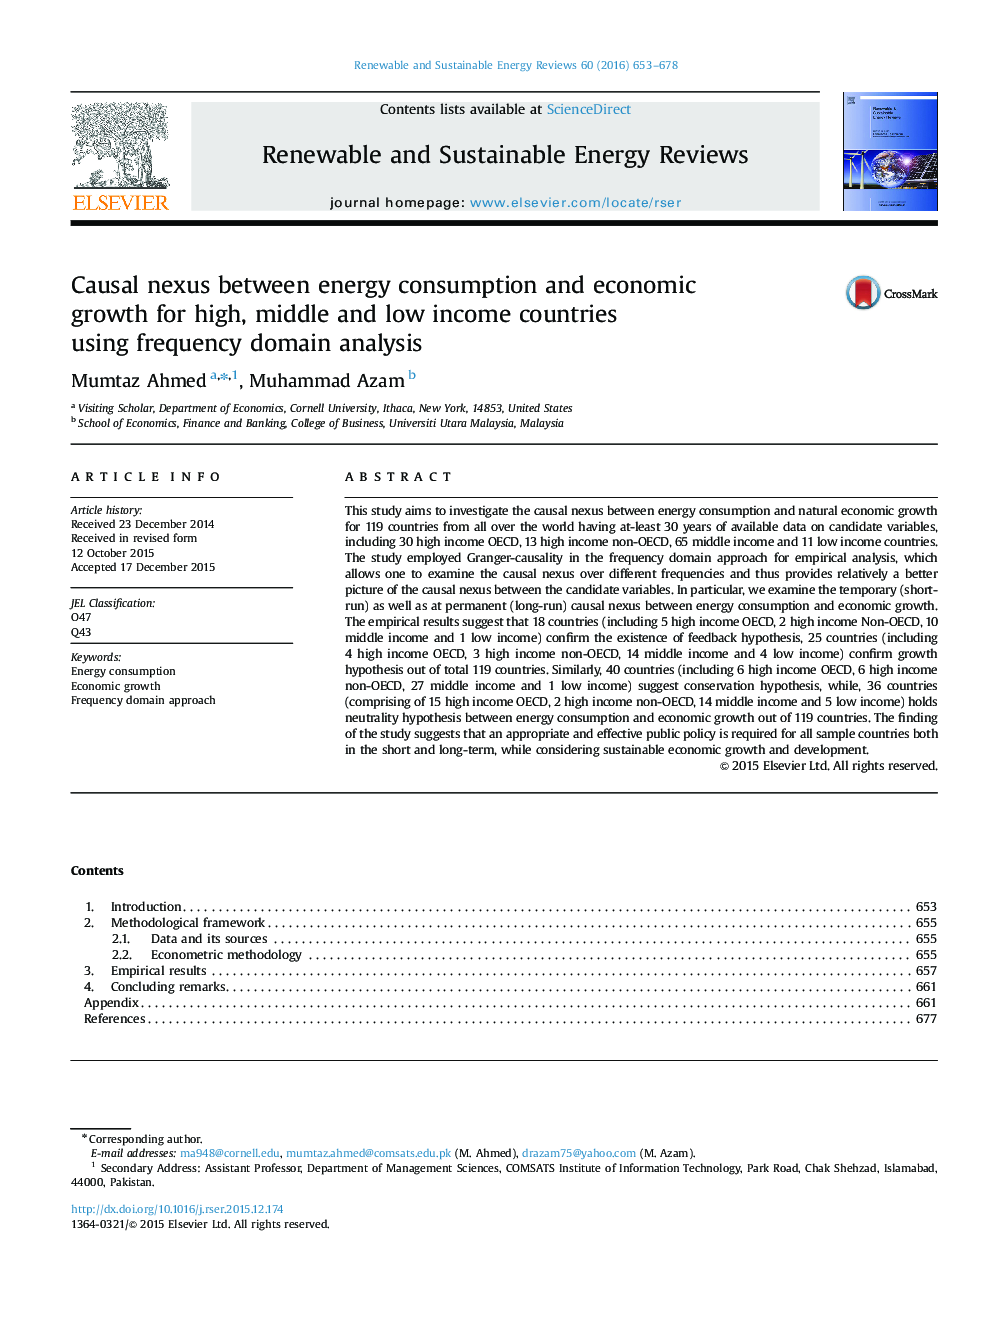 Causal nexus between energy consumption and economic growth for high, middle and low income countries using frequency domain analysis